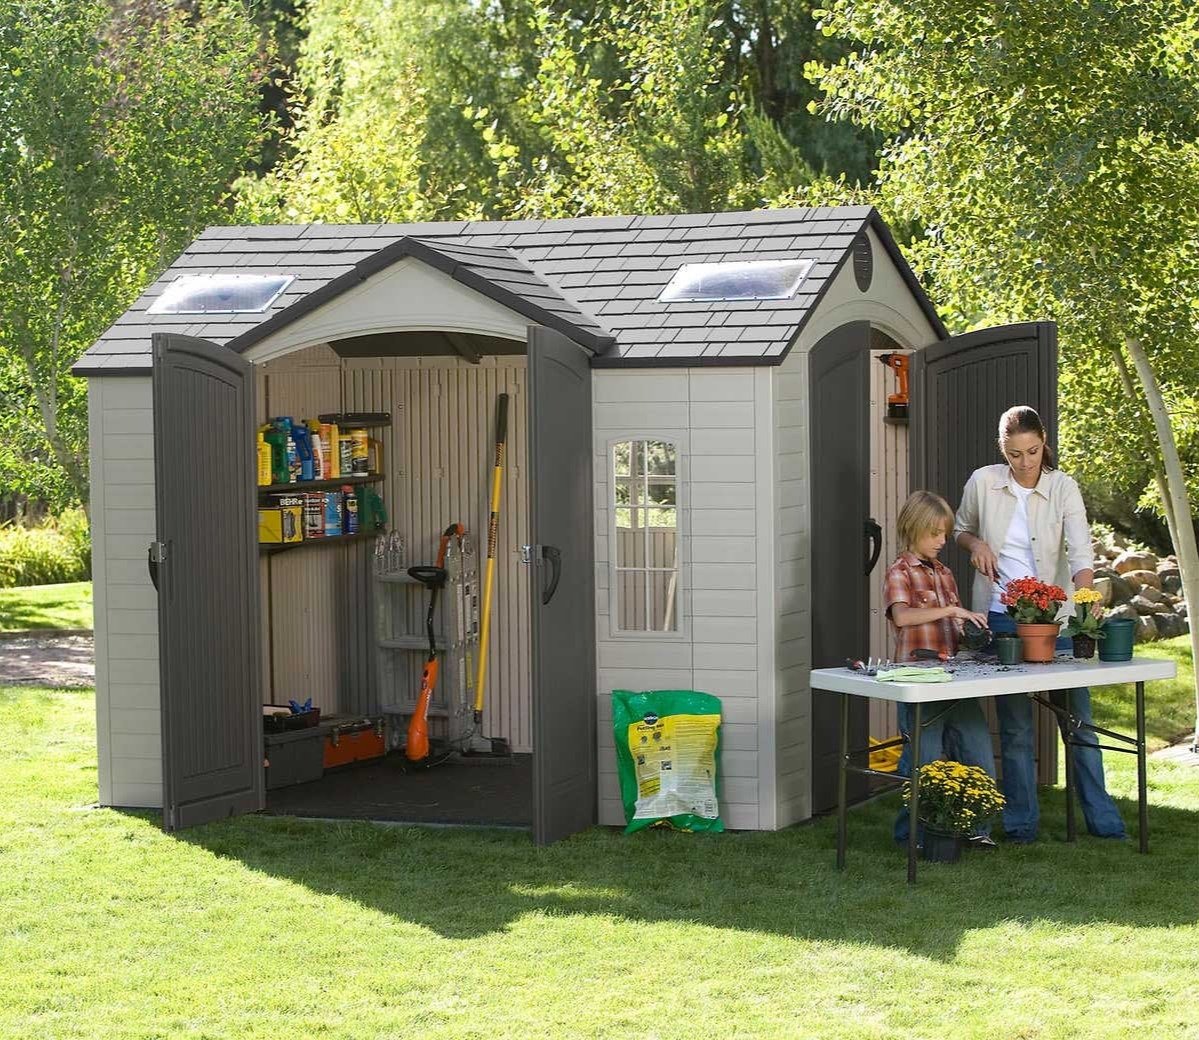 How can we make the best use of Garden Sheds